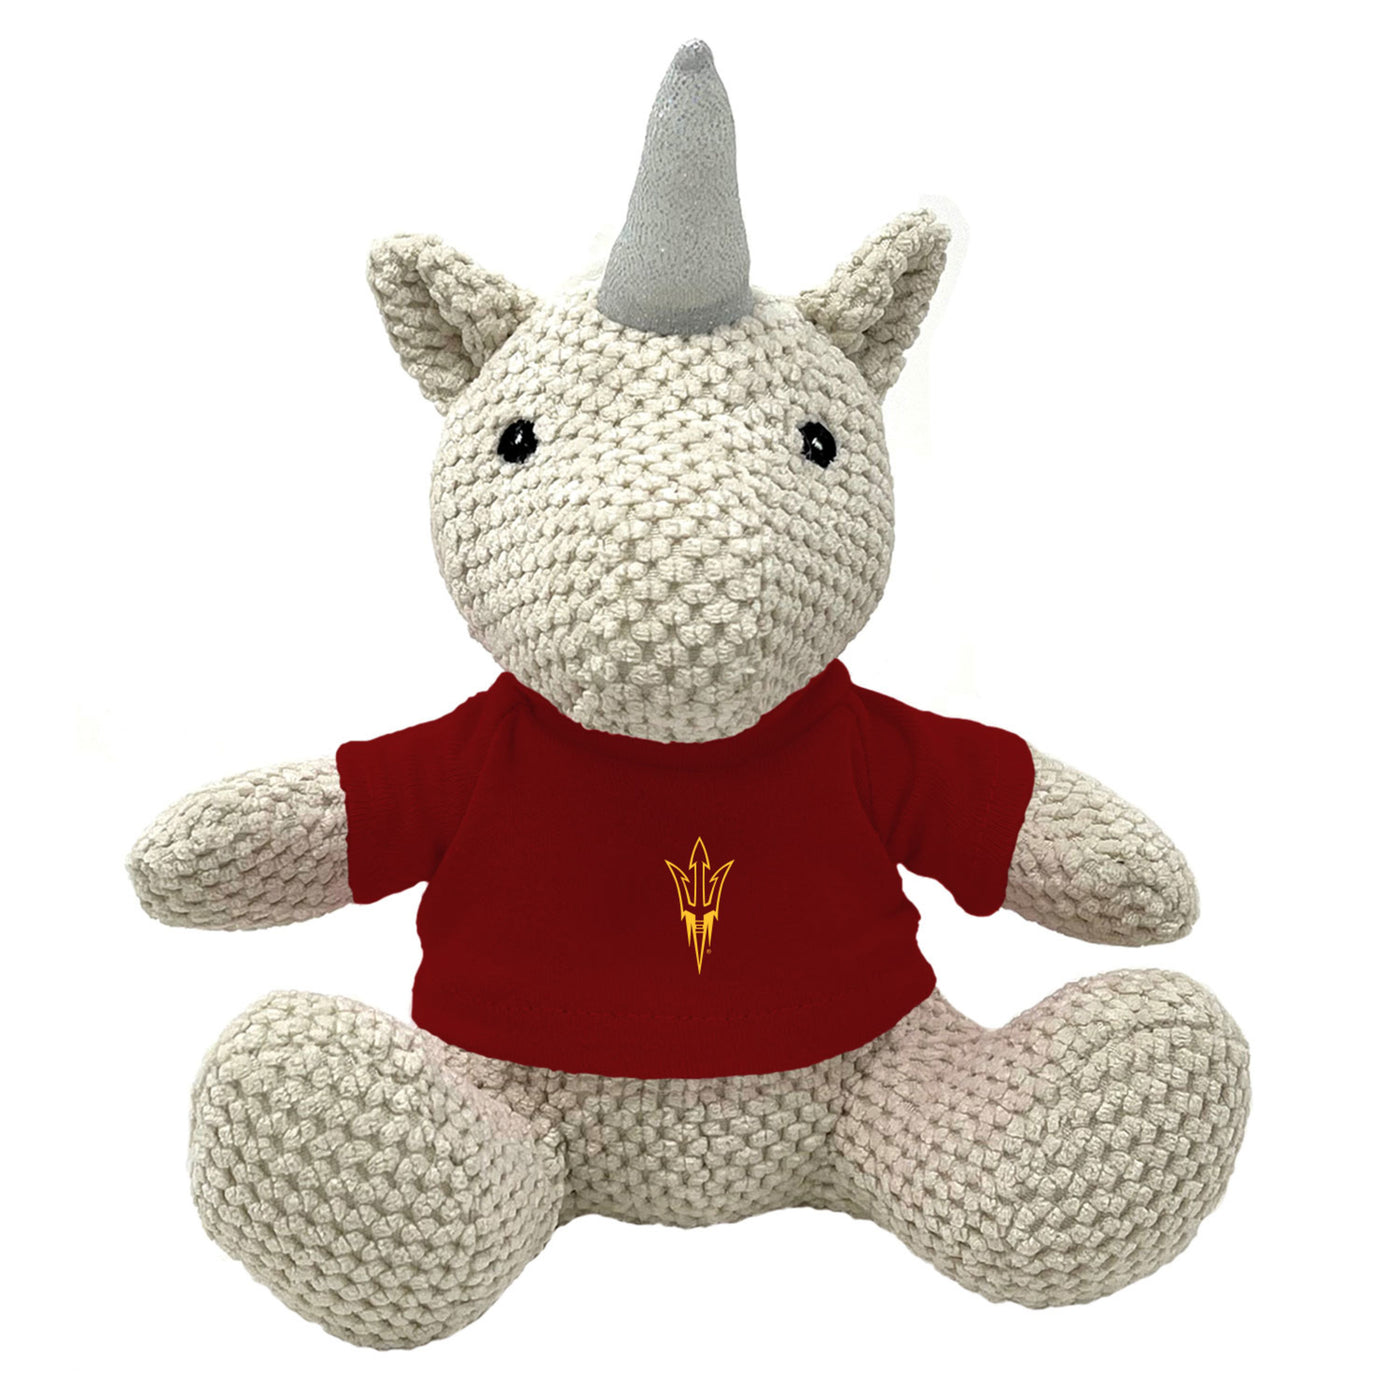 ASU white textered stuffed unicorn with a silver horn. Unicorn is wearing maroon shirt with a gold outlined pitchfork logo on it. 